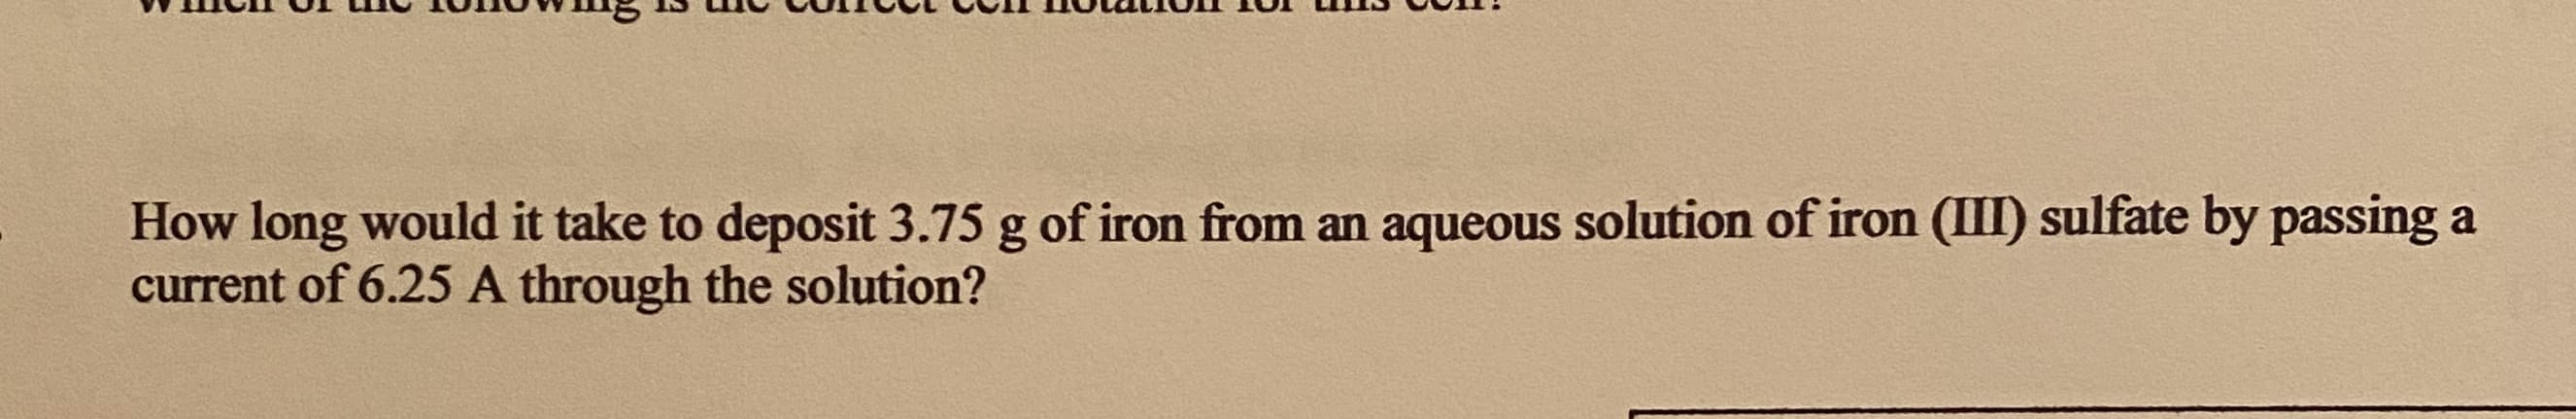 How long would it take to deposit 3.75 g of iron from an aqueous solution of iron (III) sulfate by passing a
current of 6.25 A through the solution?
